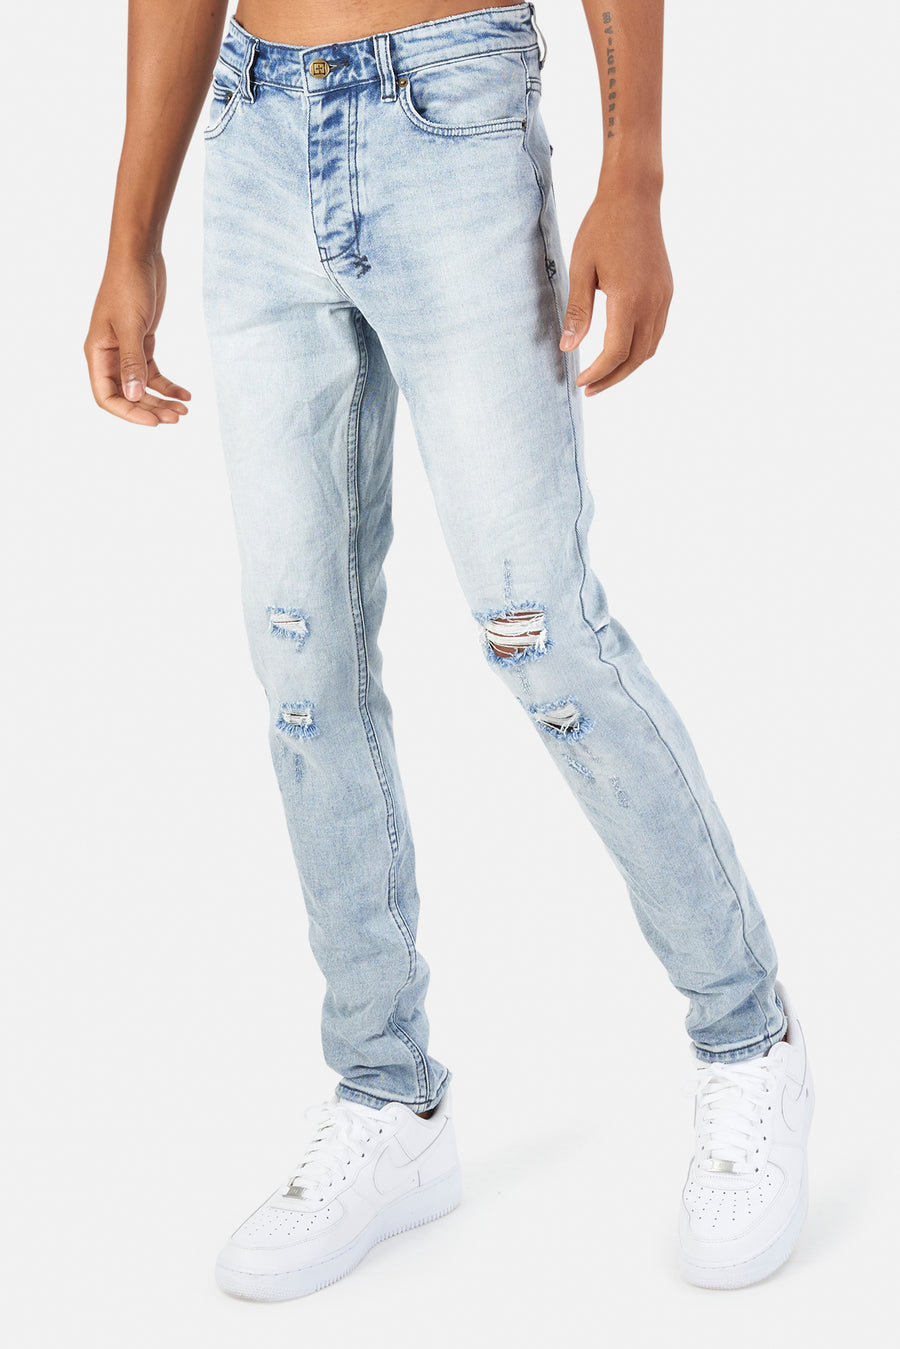 Chitch Jean Philly Blue - blueandcream